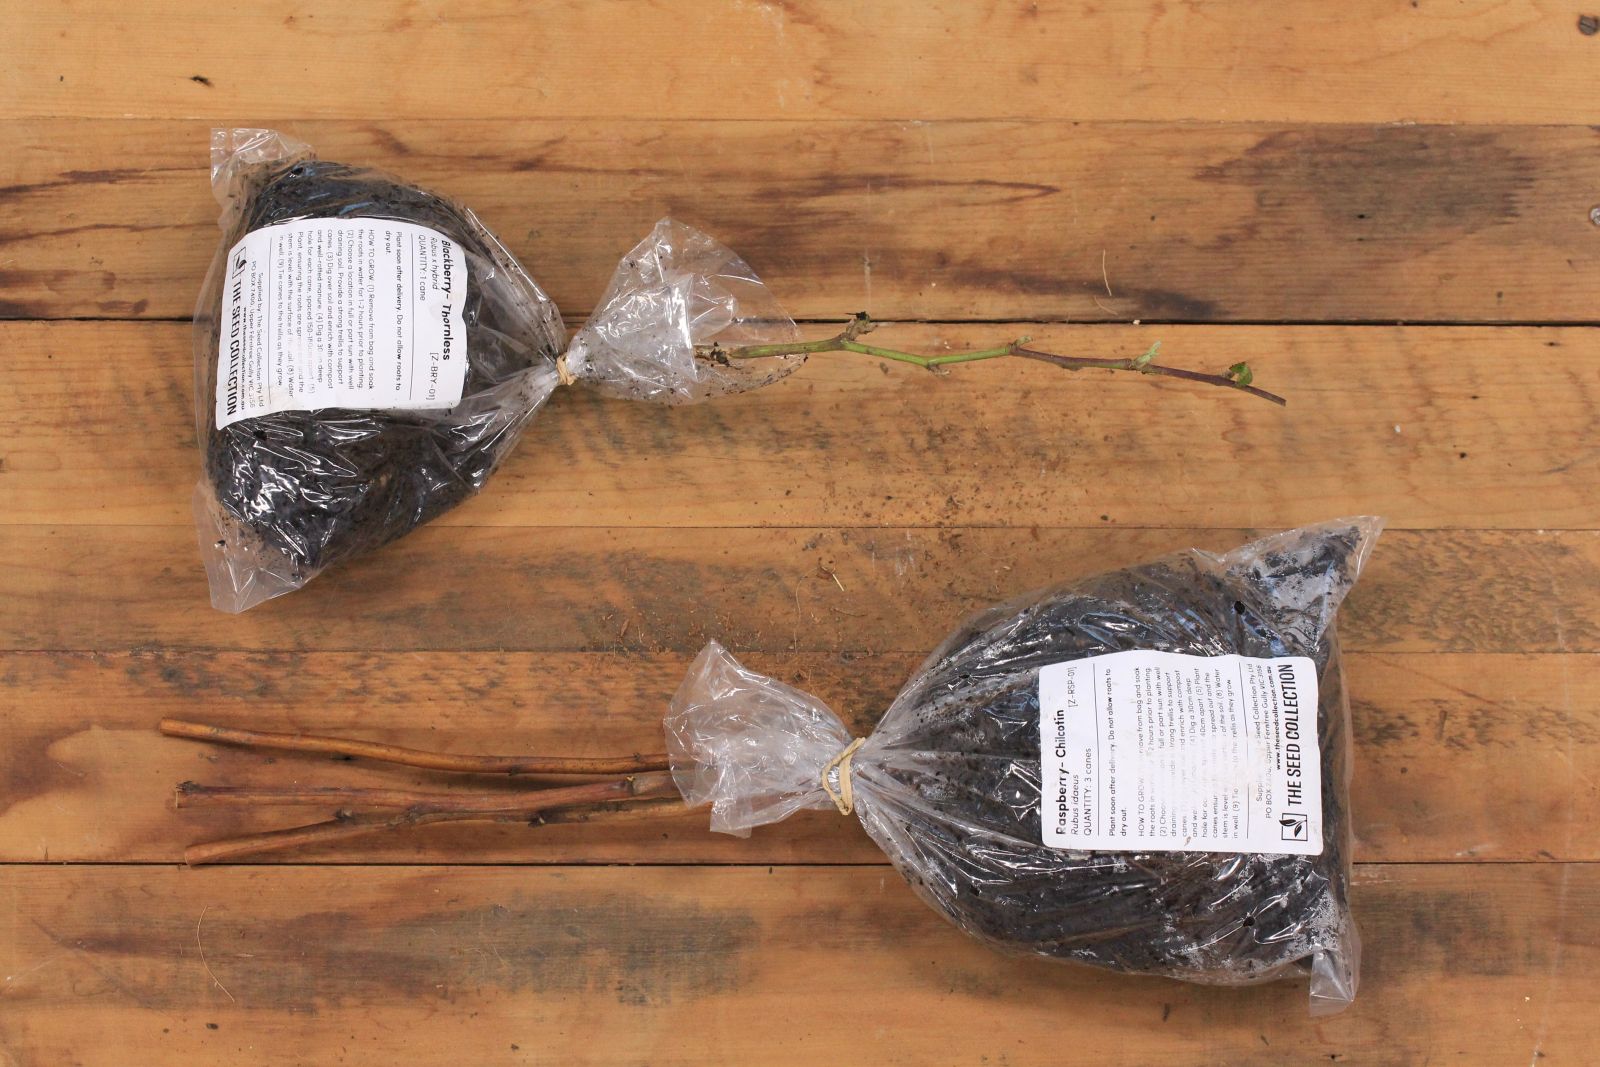 A photo showing packaged berry canes. One bag has one blackberry cane and one bag has three raspberry canes. The canes are packaged in plastic bags and potting mix with a label with basic planting instructions.